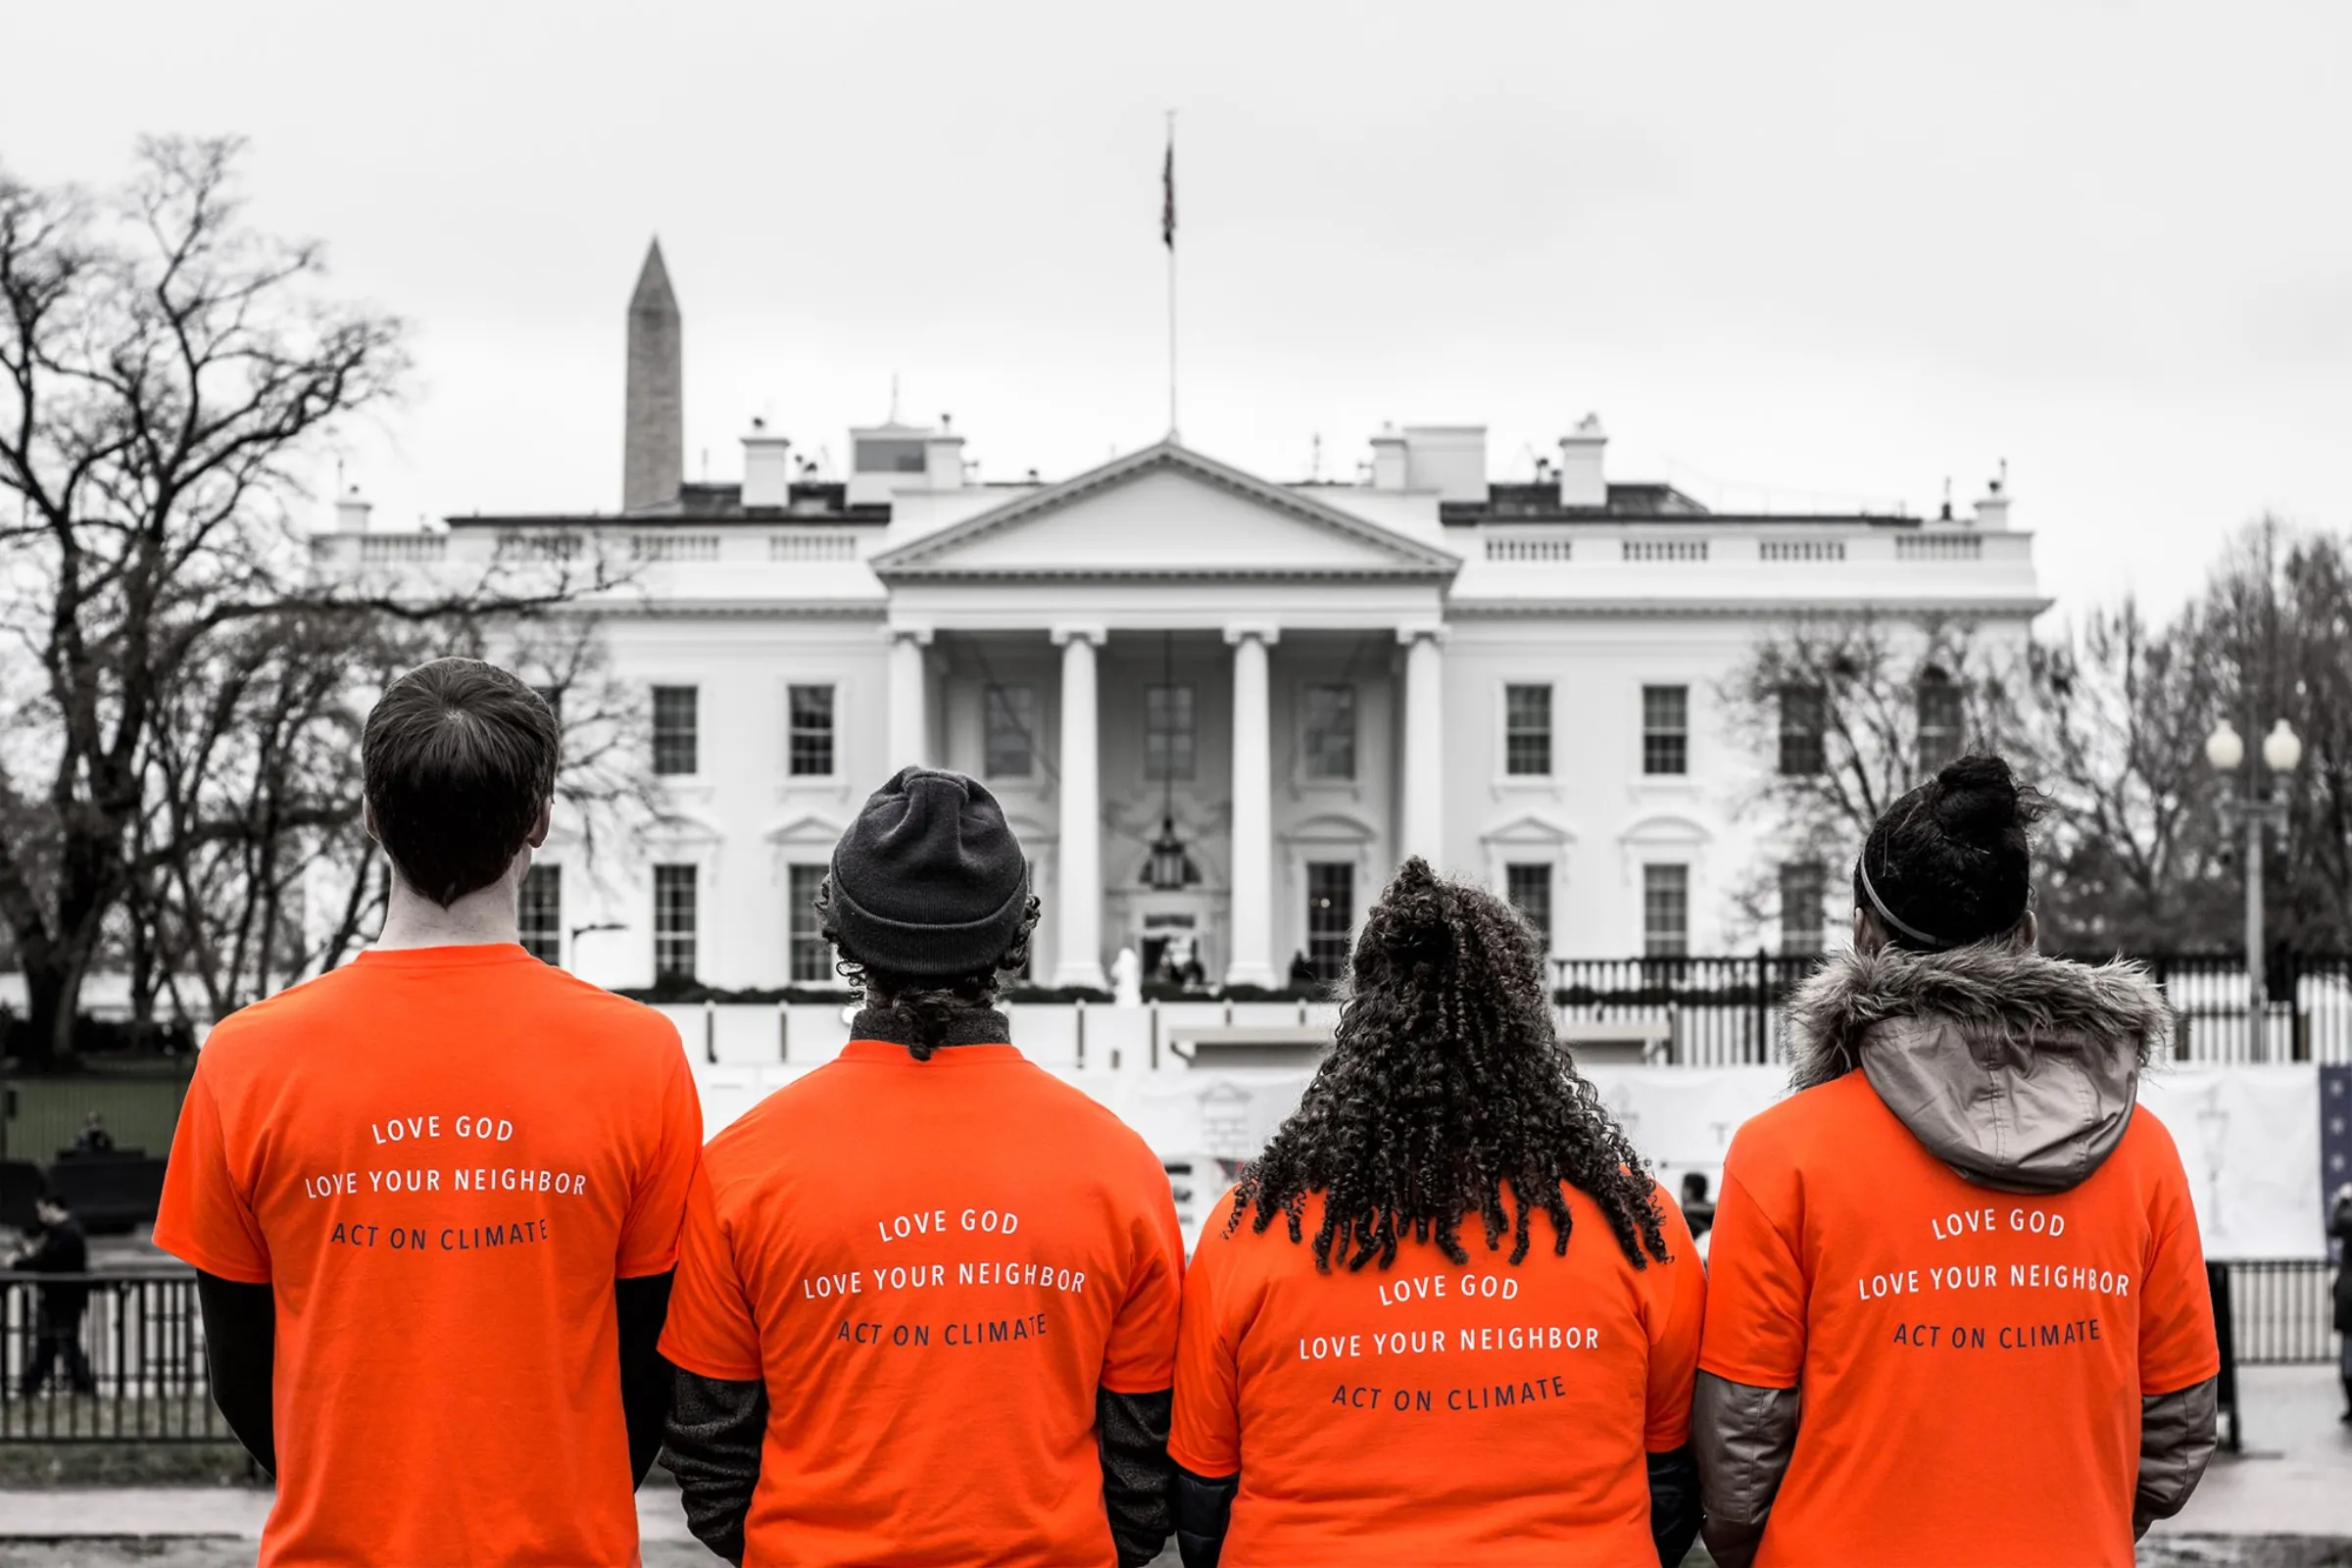 Members of Young Evangelicals for Climate Action in Washington DC at a Climate Die-In vigil they hosted at the White House